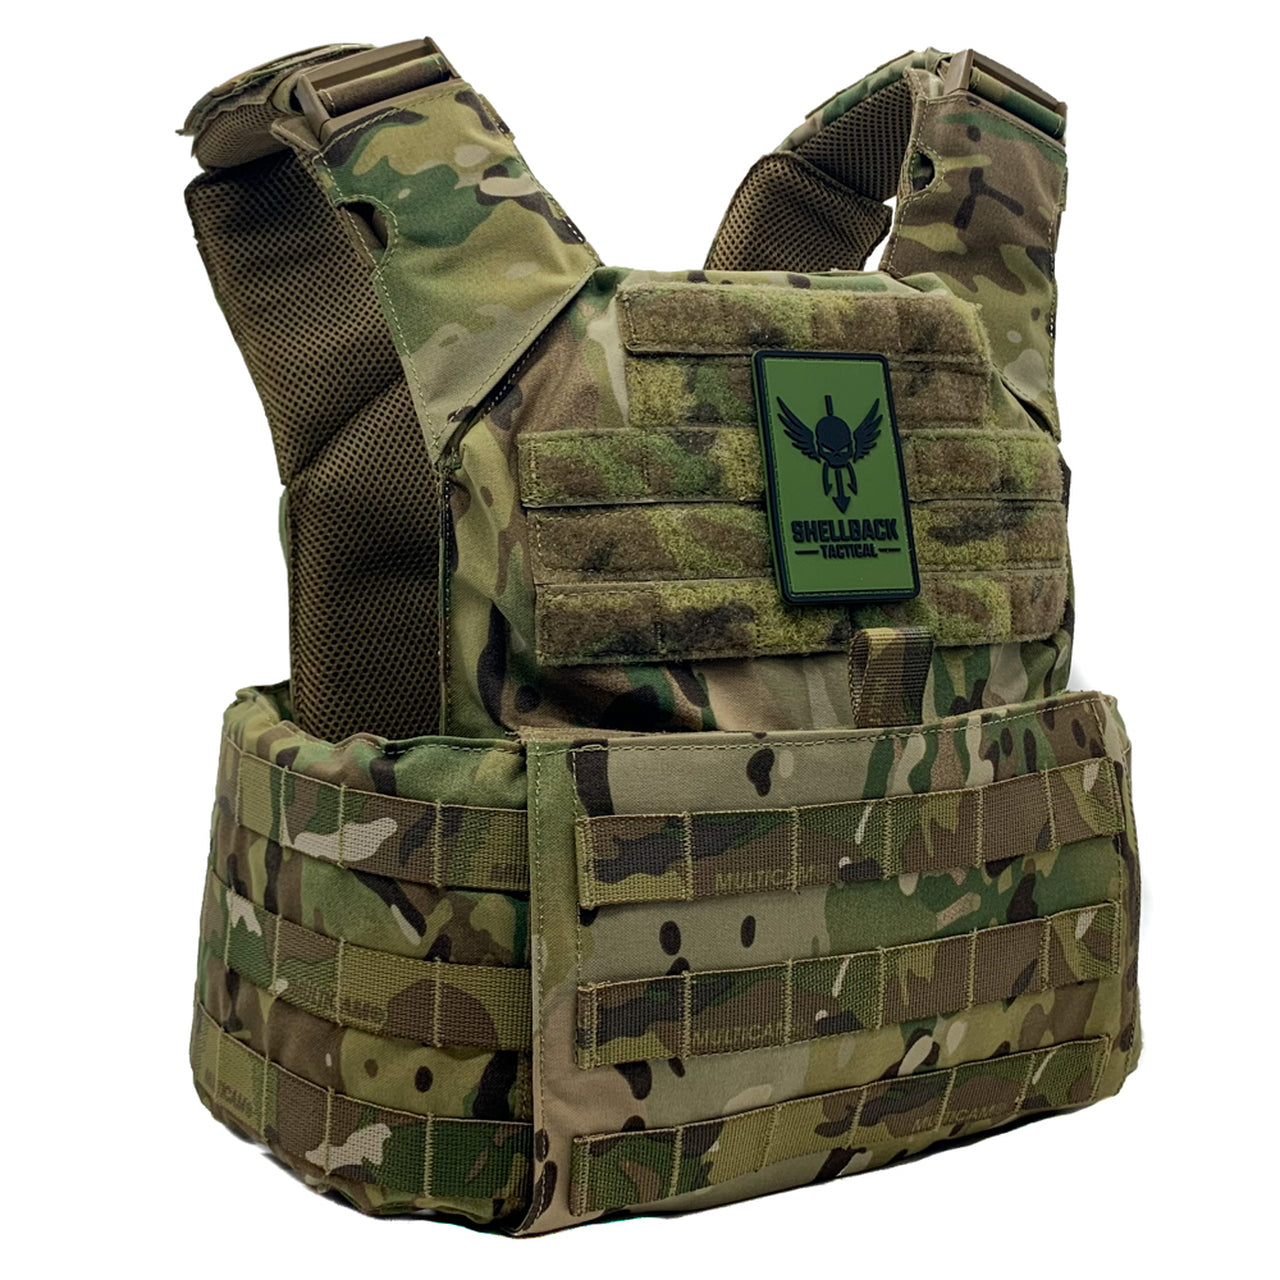 A Shellback Tactical Skirmish Plate Carrier on a white background.